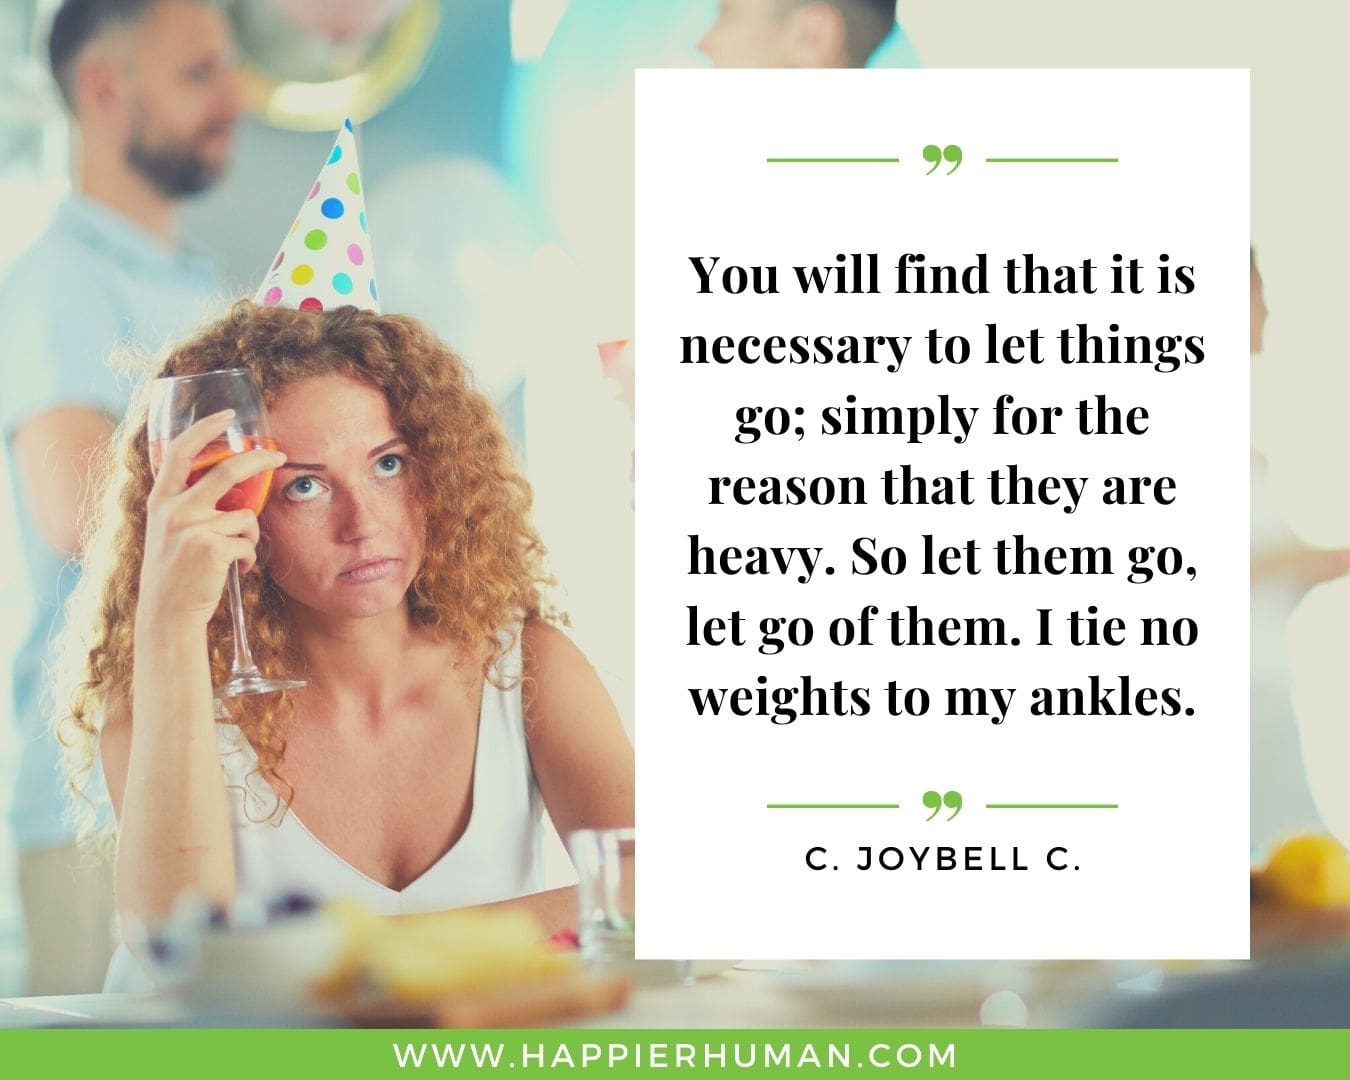 Toxic People Quotes - “You will find that it is necessary to let things go; simply for the reason that they are heavy. So let them go, let go of them. I tie no weights to my ankles.” – C. JoyBell C.